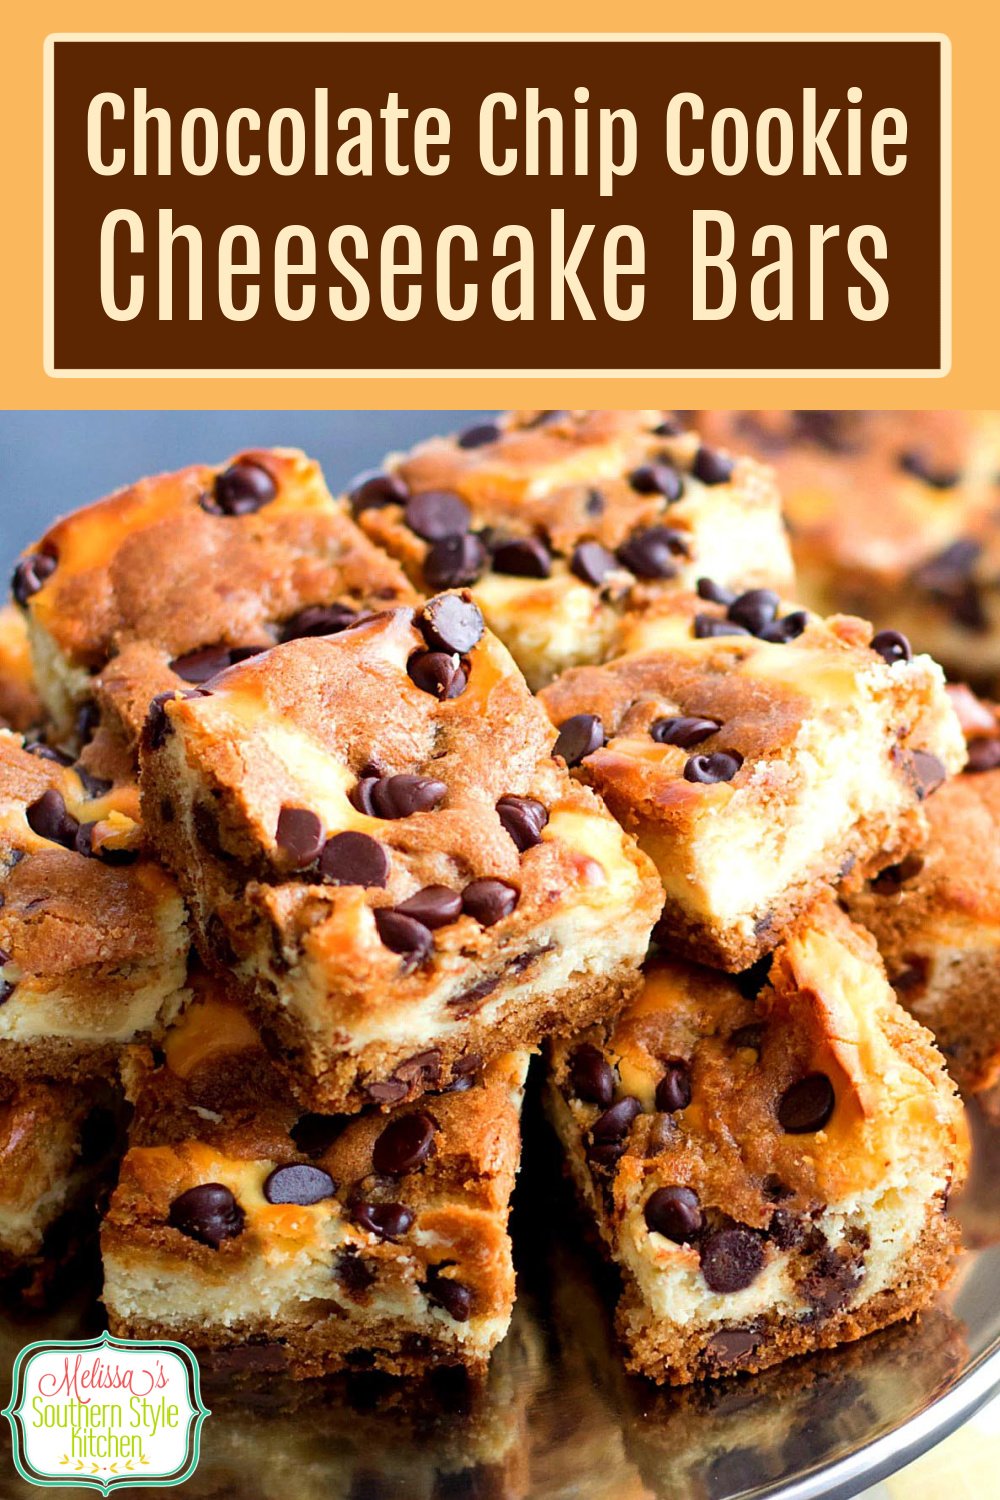 Cheesecake and chocolate chip cookies collide in these easy Chocolate Chip Cookie Cheesecake Bars #chocolatechipcookies #cheesecake #chocolatechipcheesecakebars #cookiebars #cookierecipes #holidaybaking #cheesecakerecipes #southerndesserts via @melissasssk